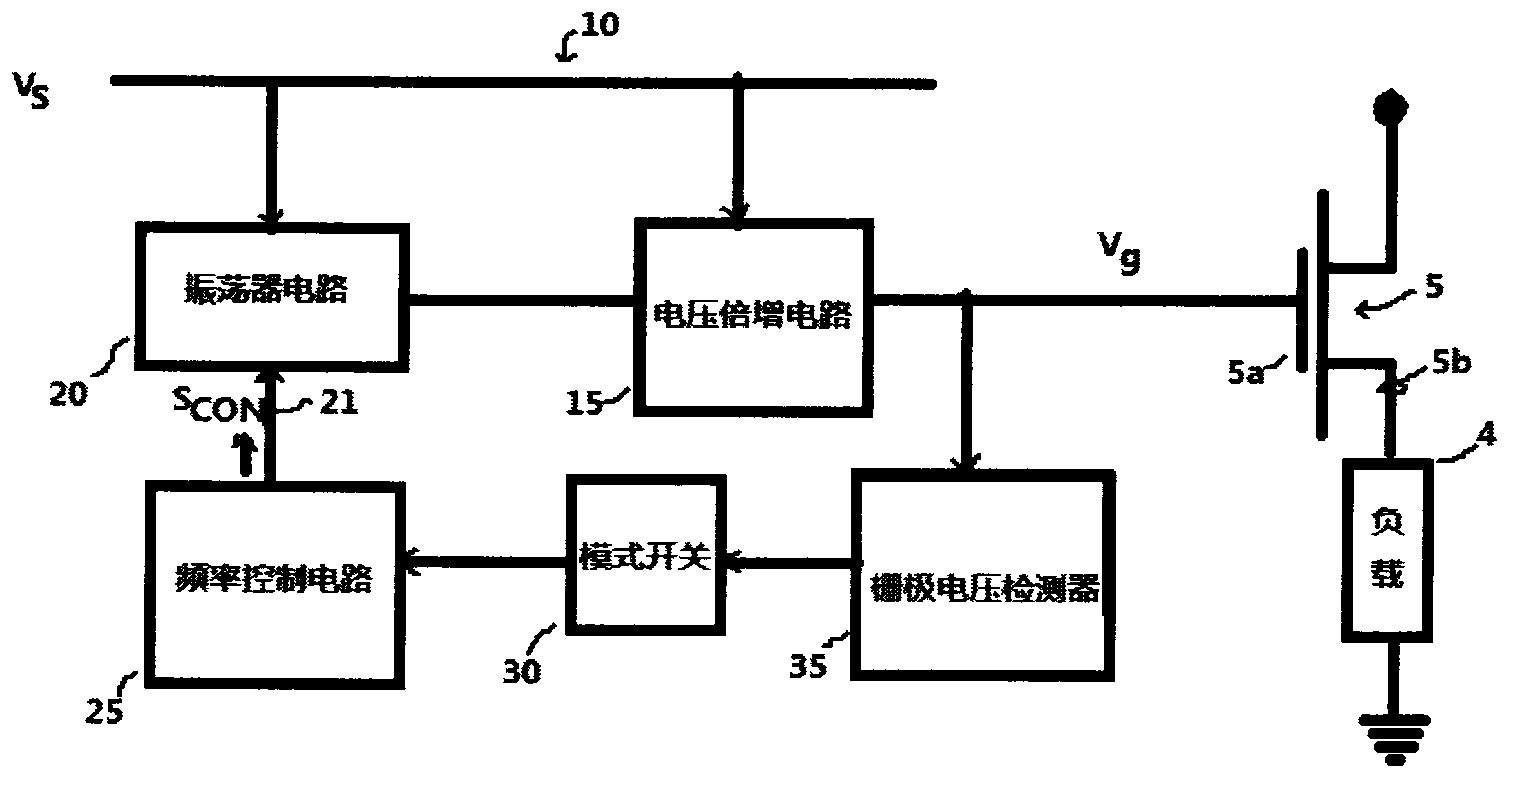 Low-power-consumption charge pump for field effect power tube grid drive